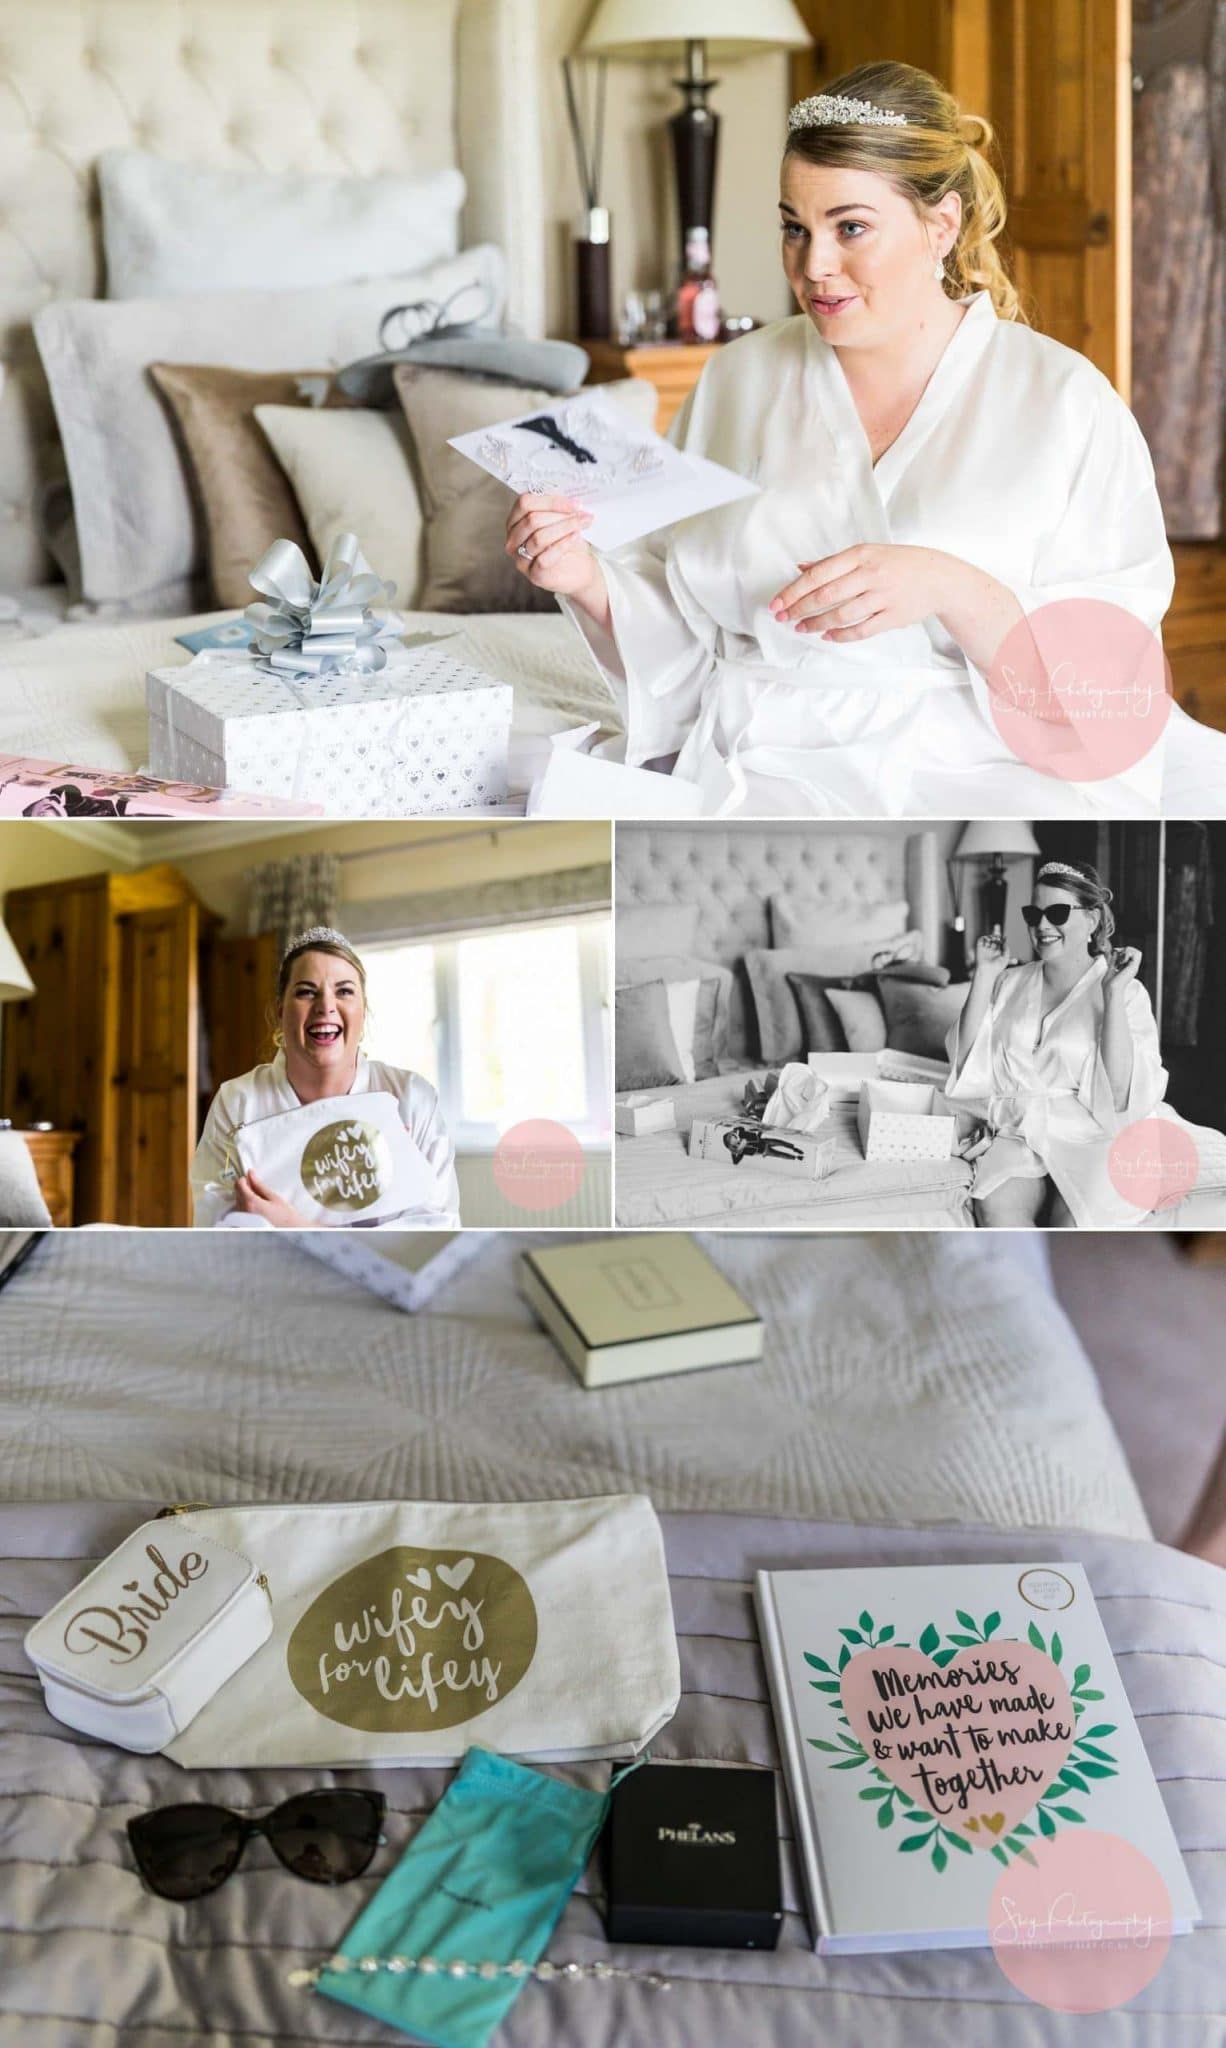 Bride getting emotional after receiving her gifts from her groom to be